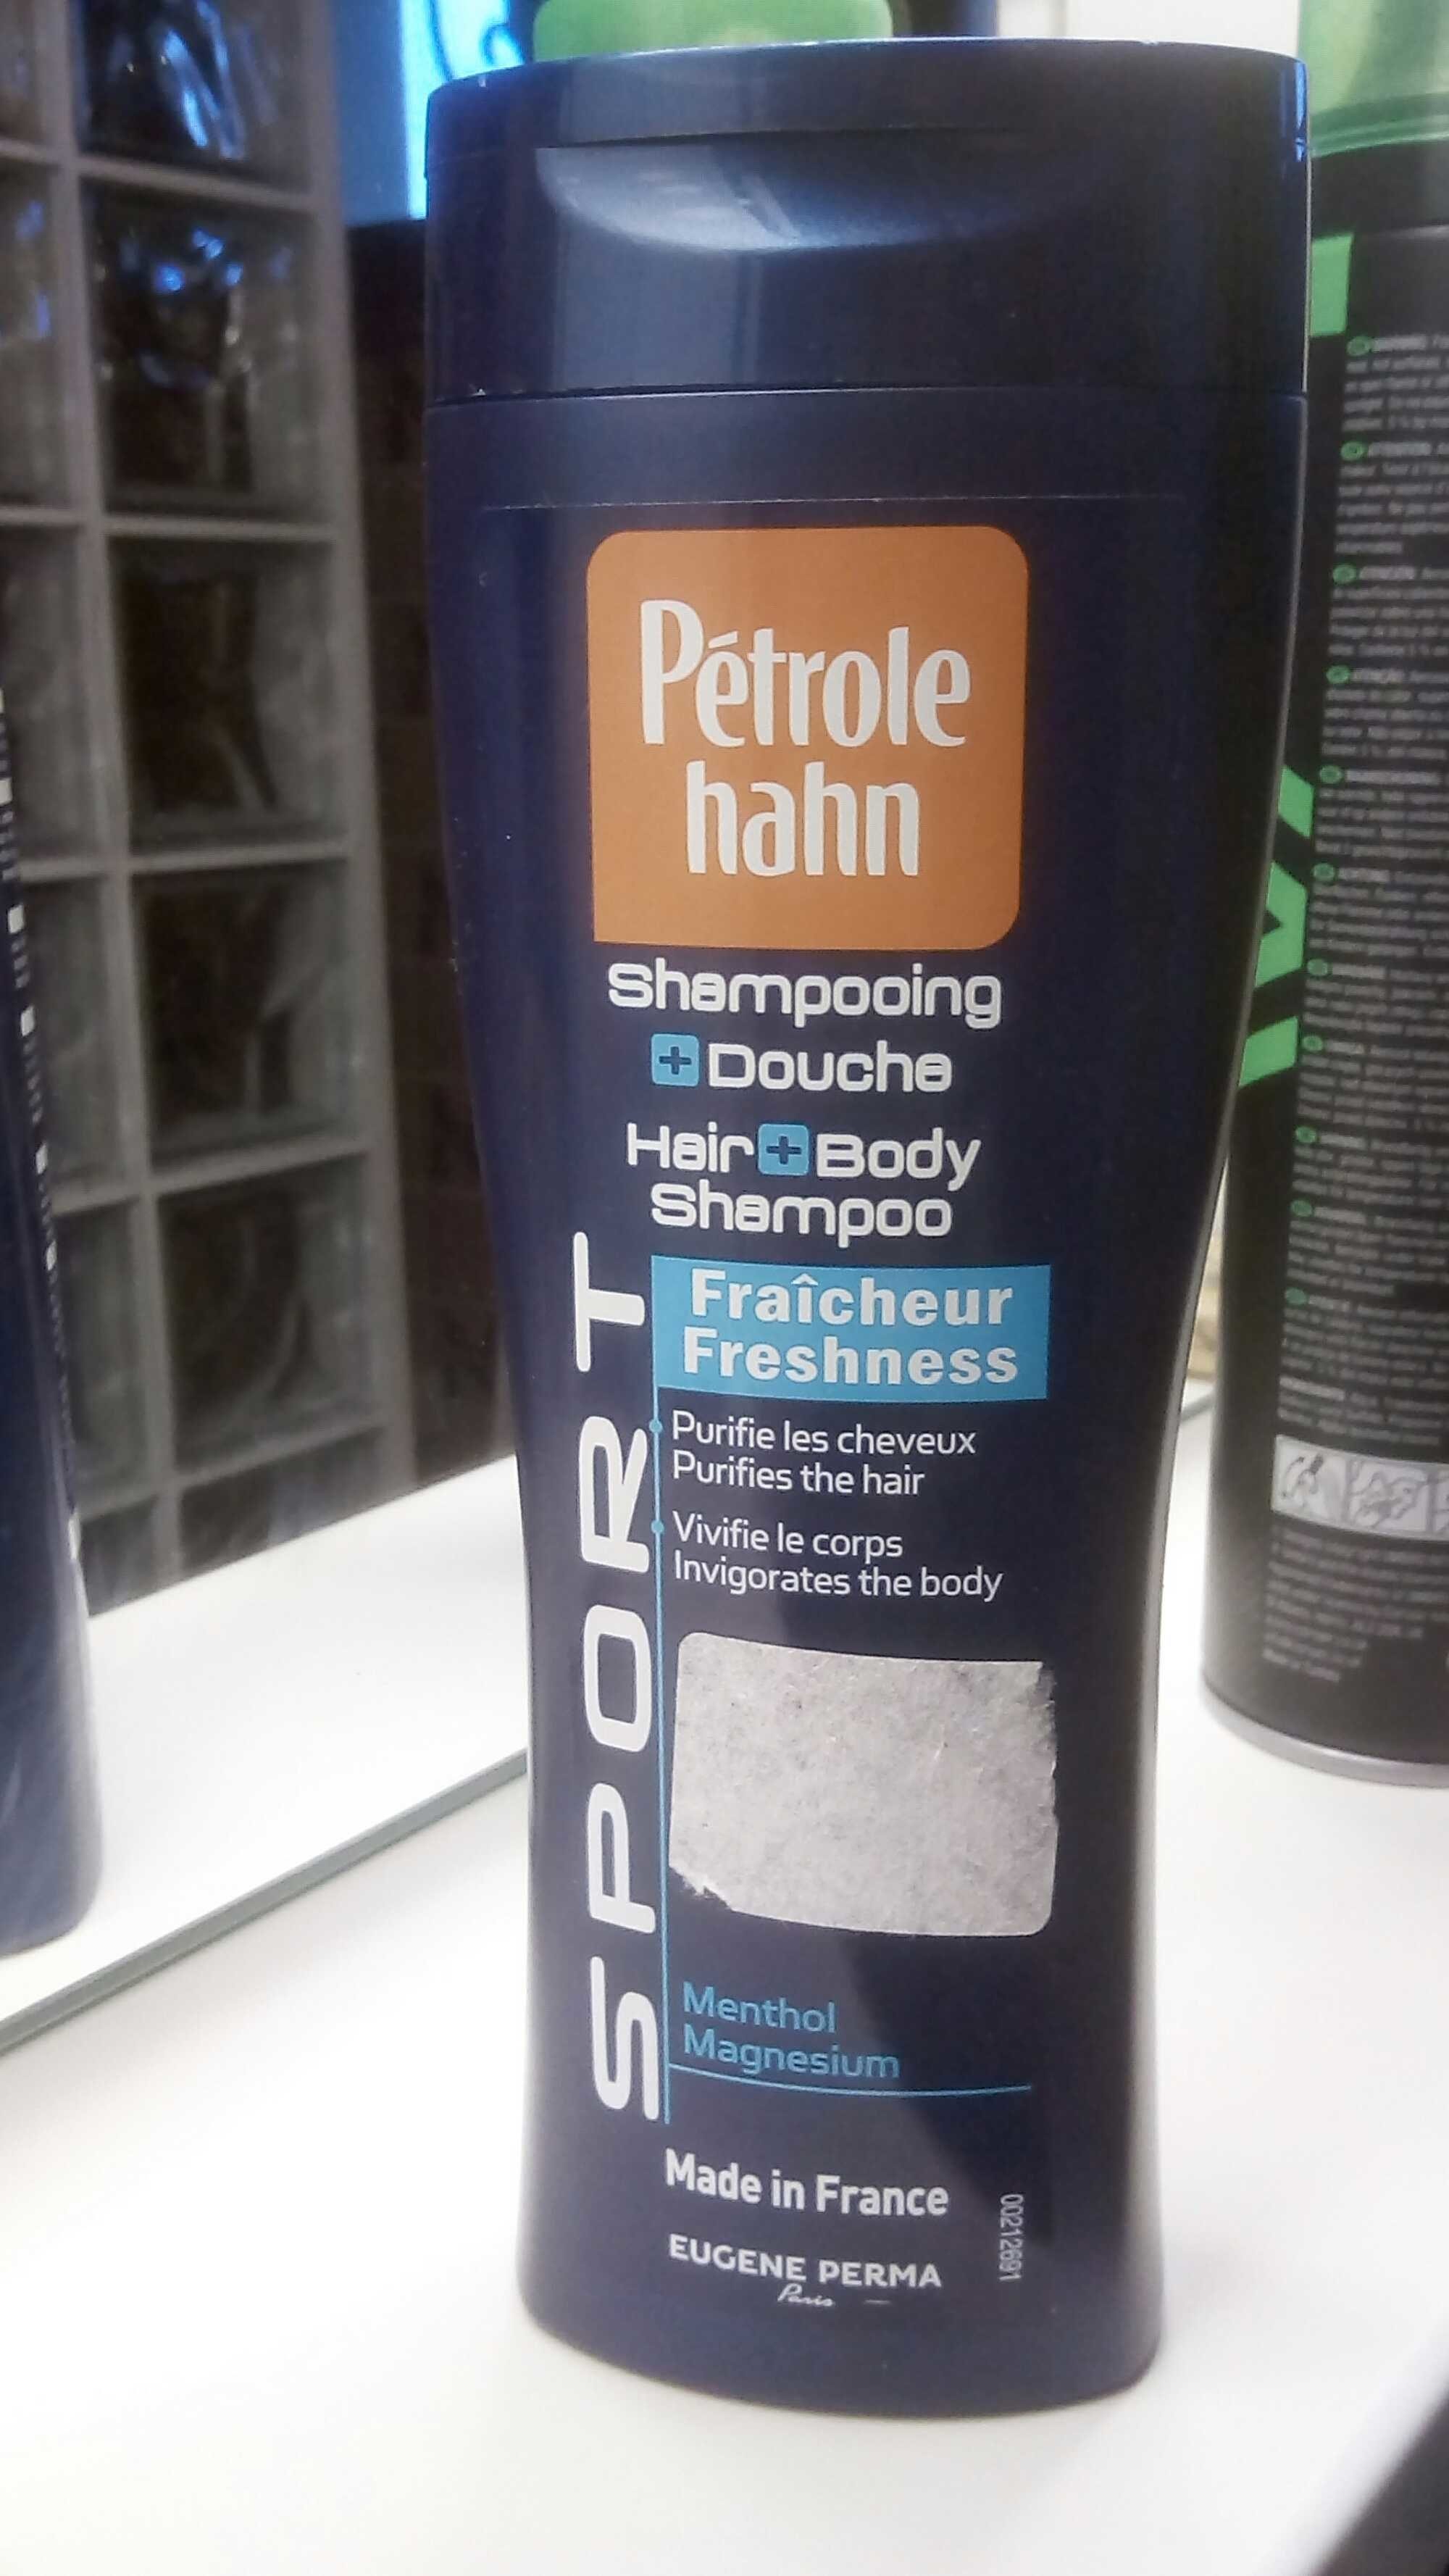 Shampooing + douche - Product - fr